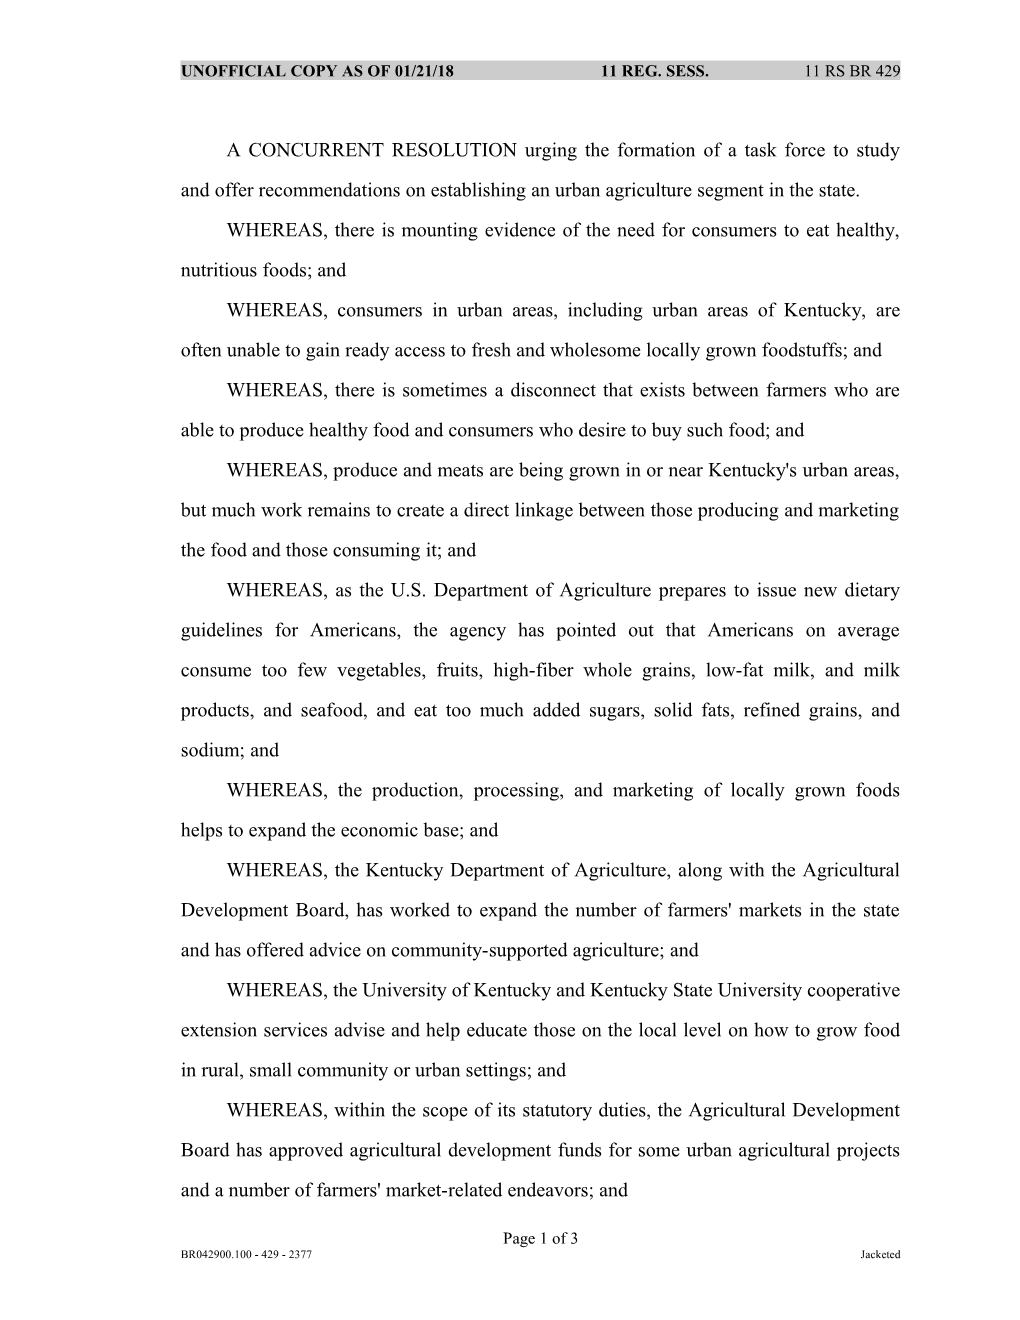 A CONCURRENT RESOLUTION Urging the Formation of a Task Force to Study and Offer Recommendations